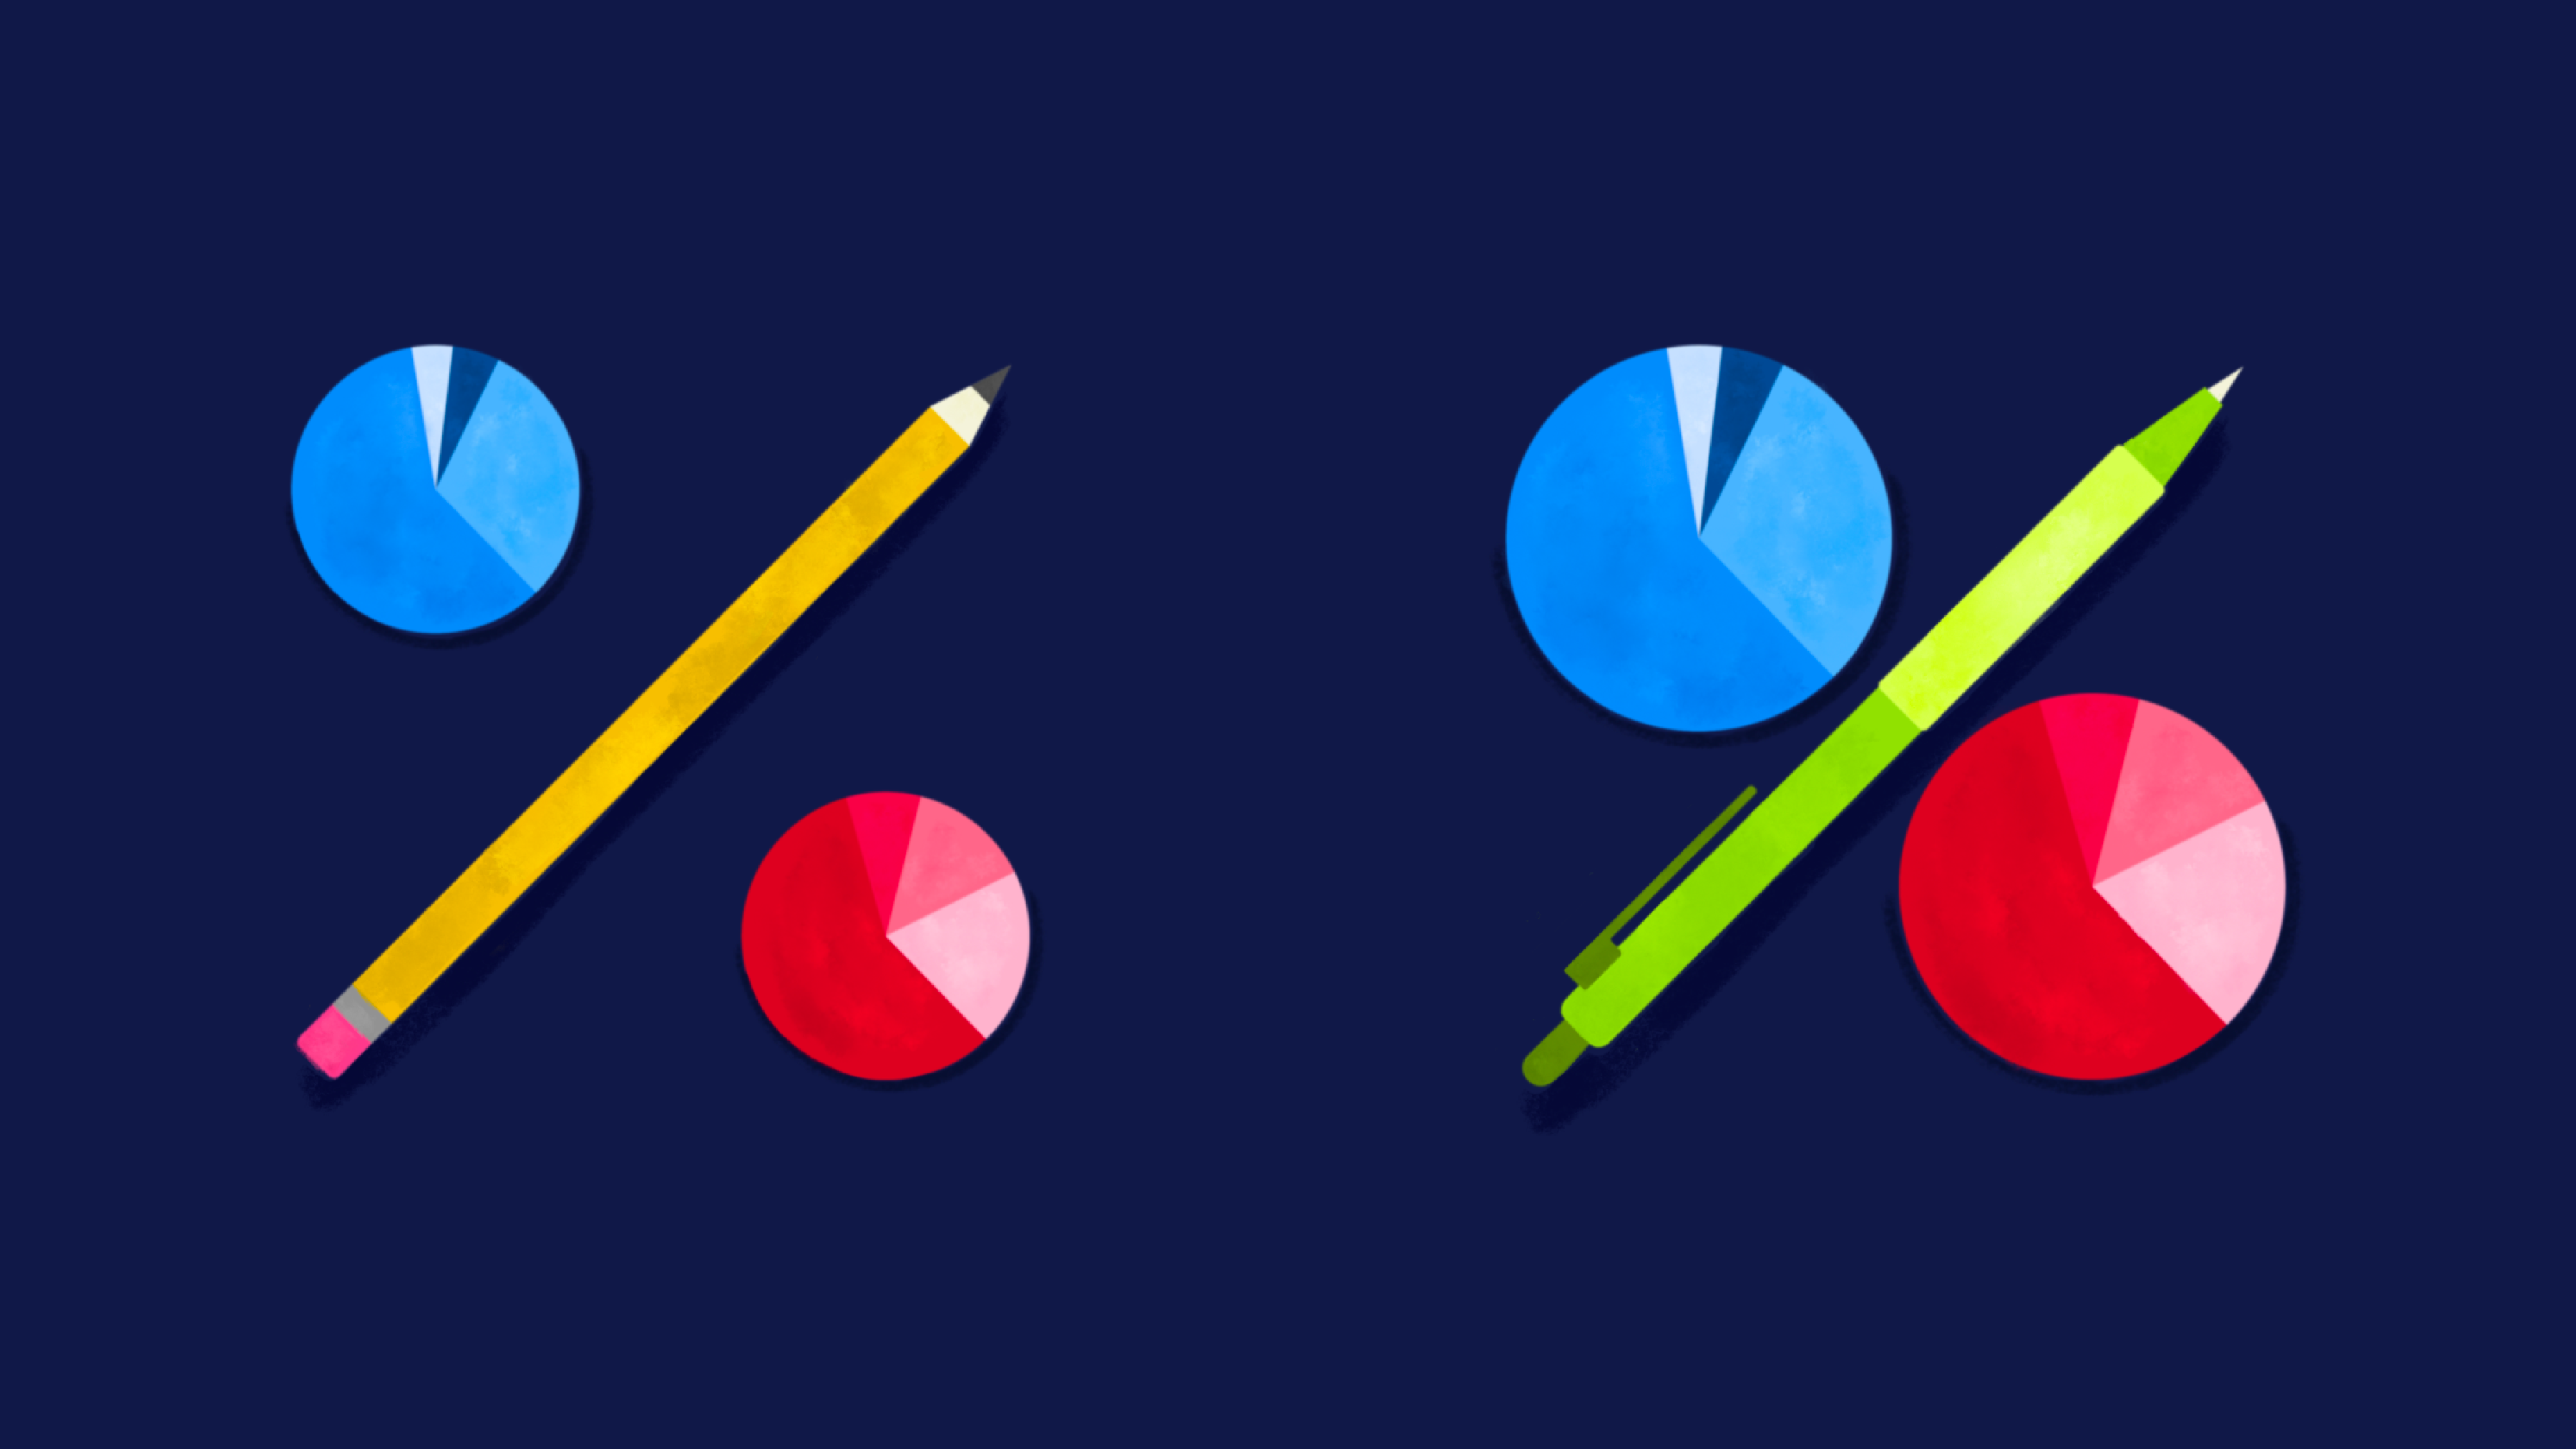 Illustration comparing two percentages with different circle sizes.